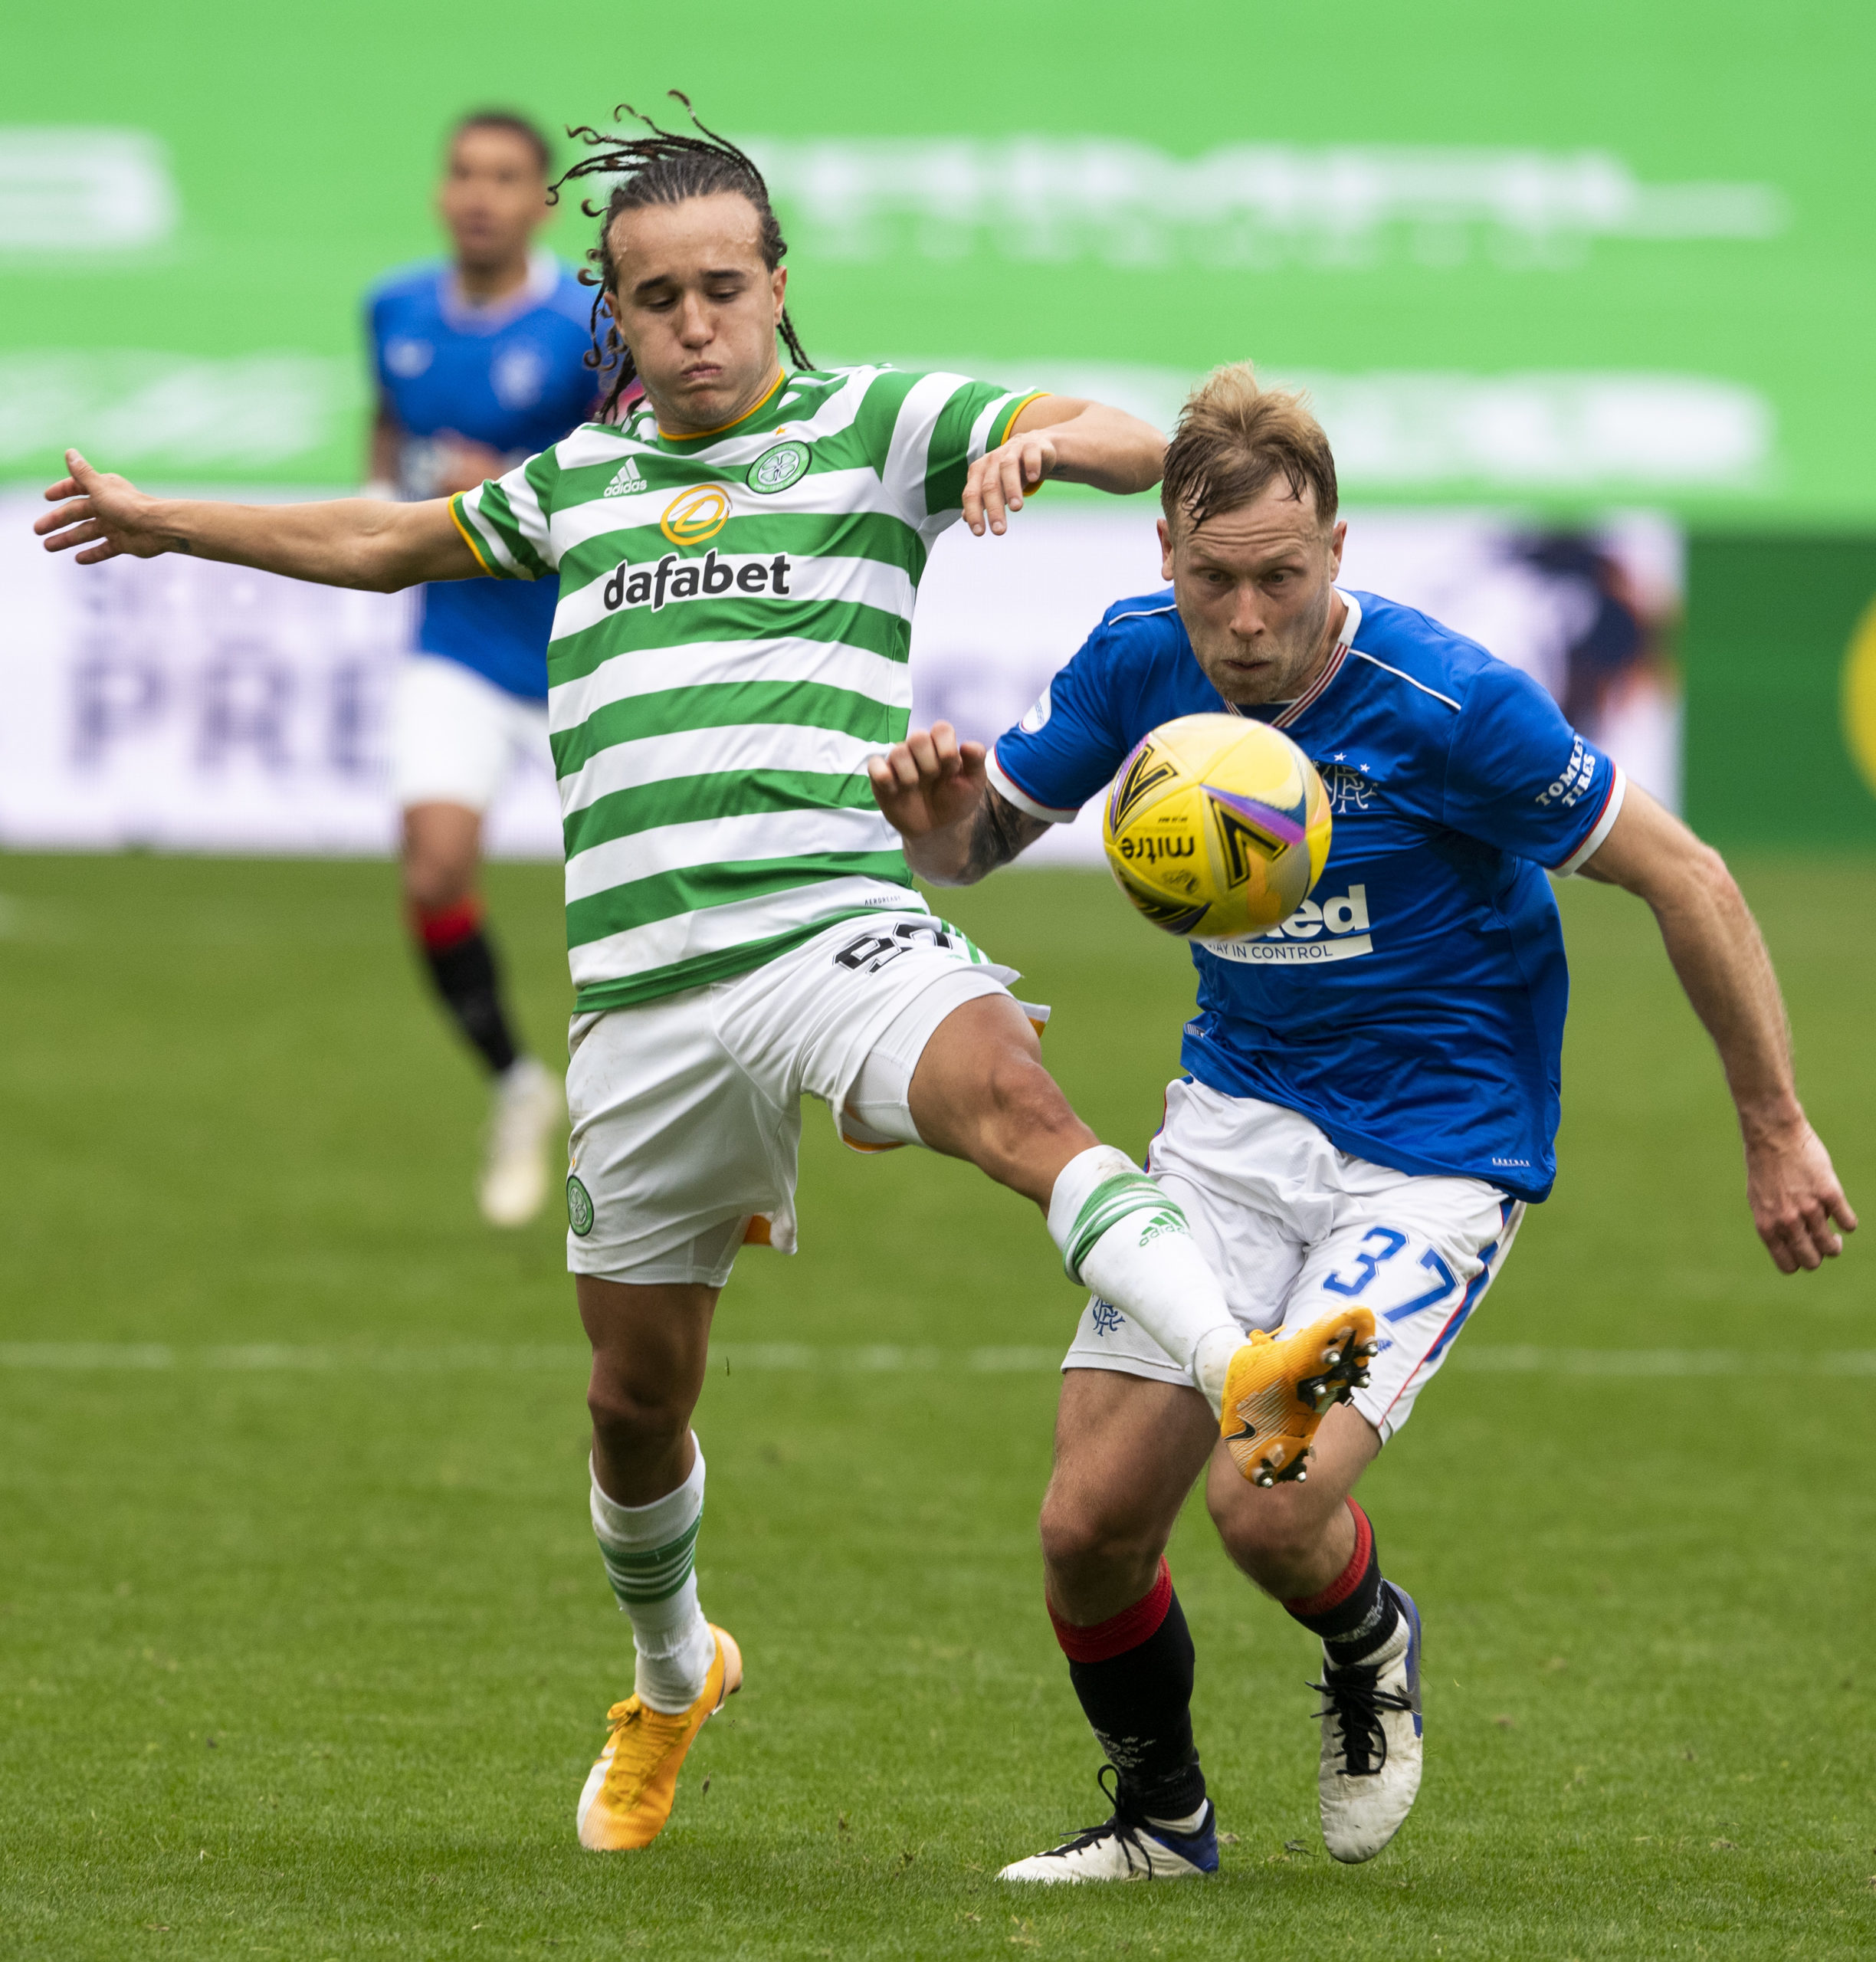 Arfield to have scan ahead of Rangers vs Celtic; Ibrox midfield could be weakened